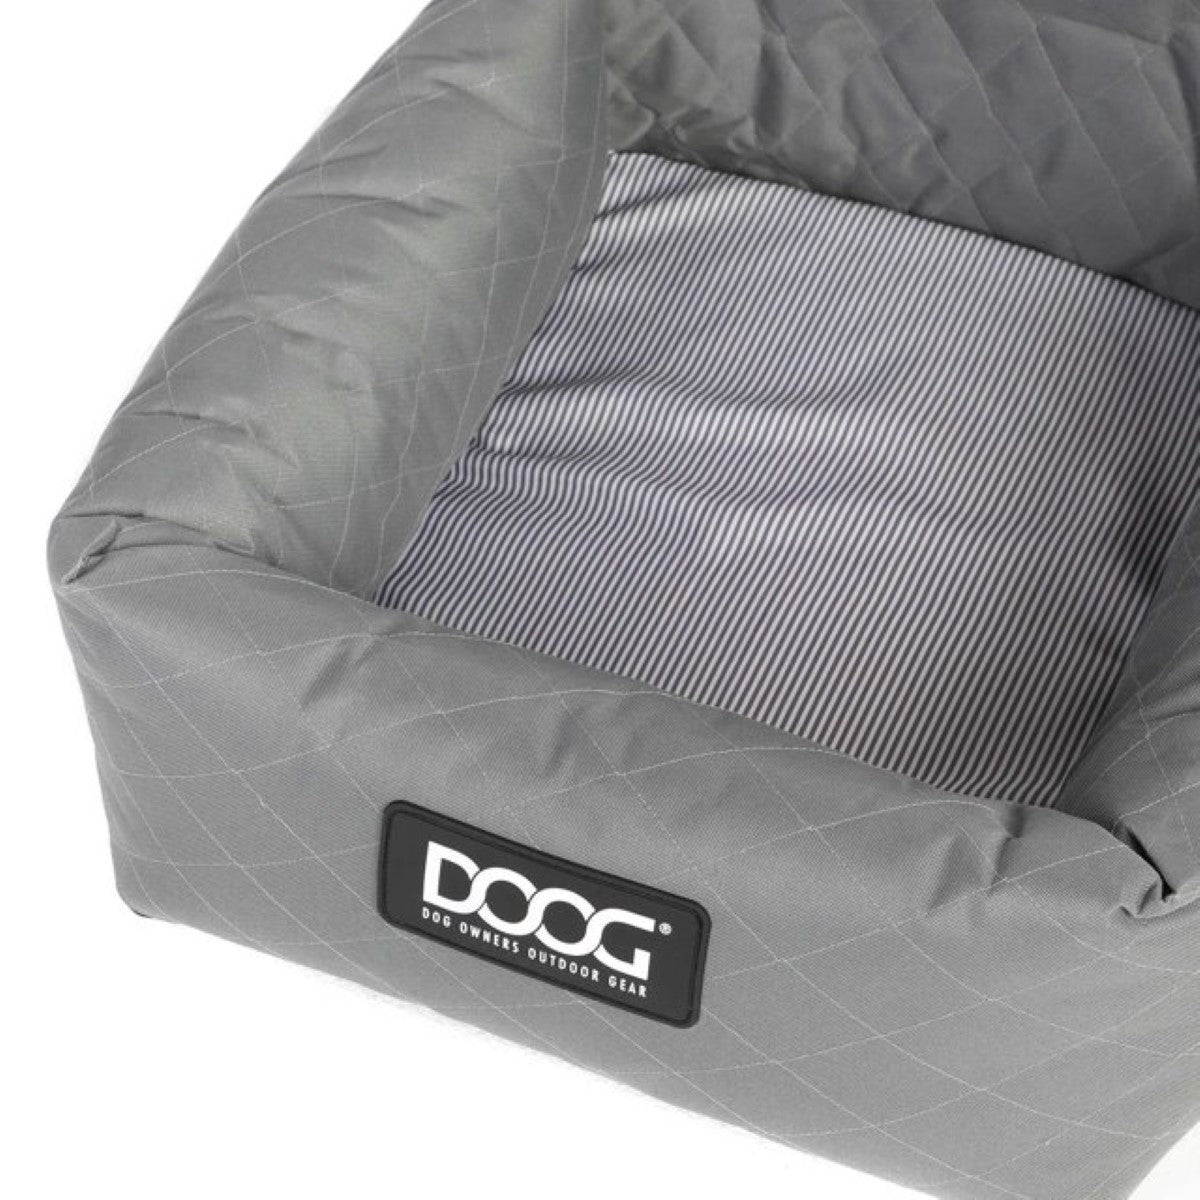 DOOG Pet Car Seat - Helps Anxiety and Motion Sickness